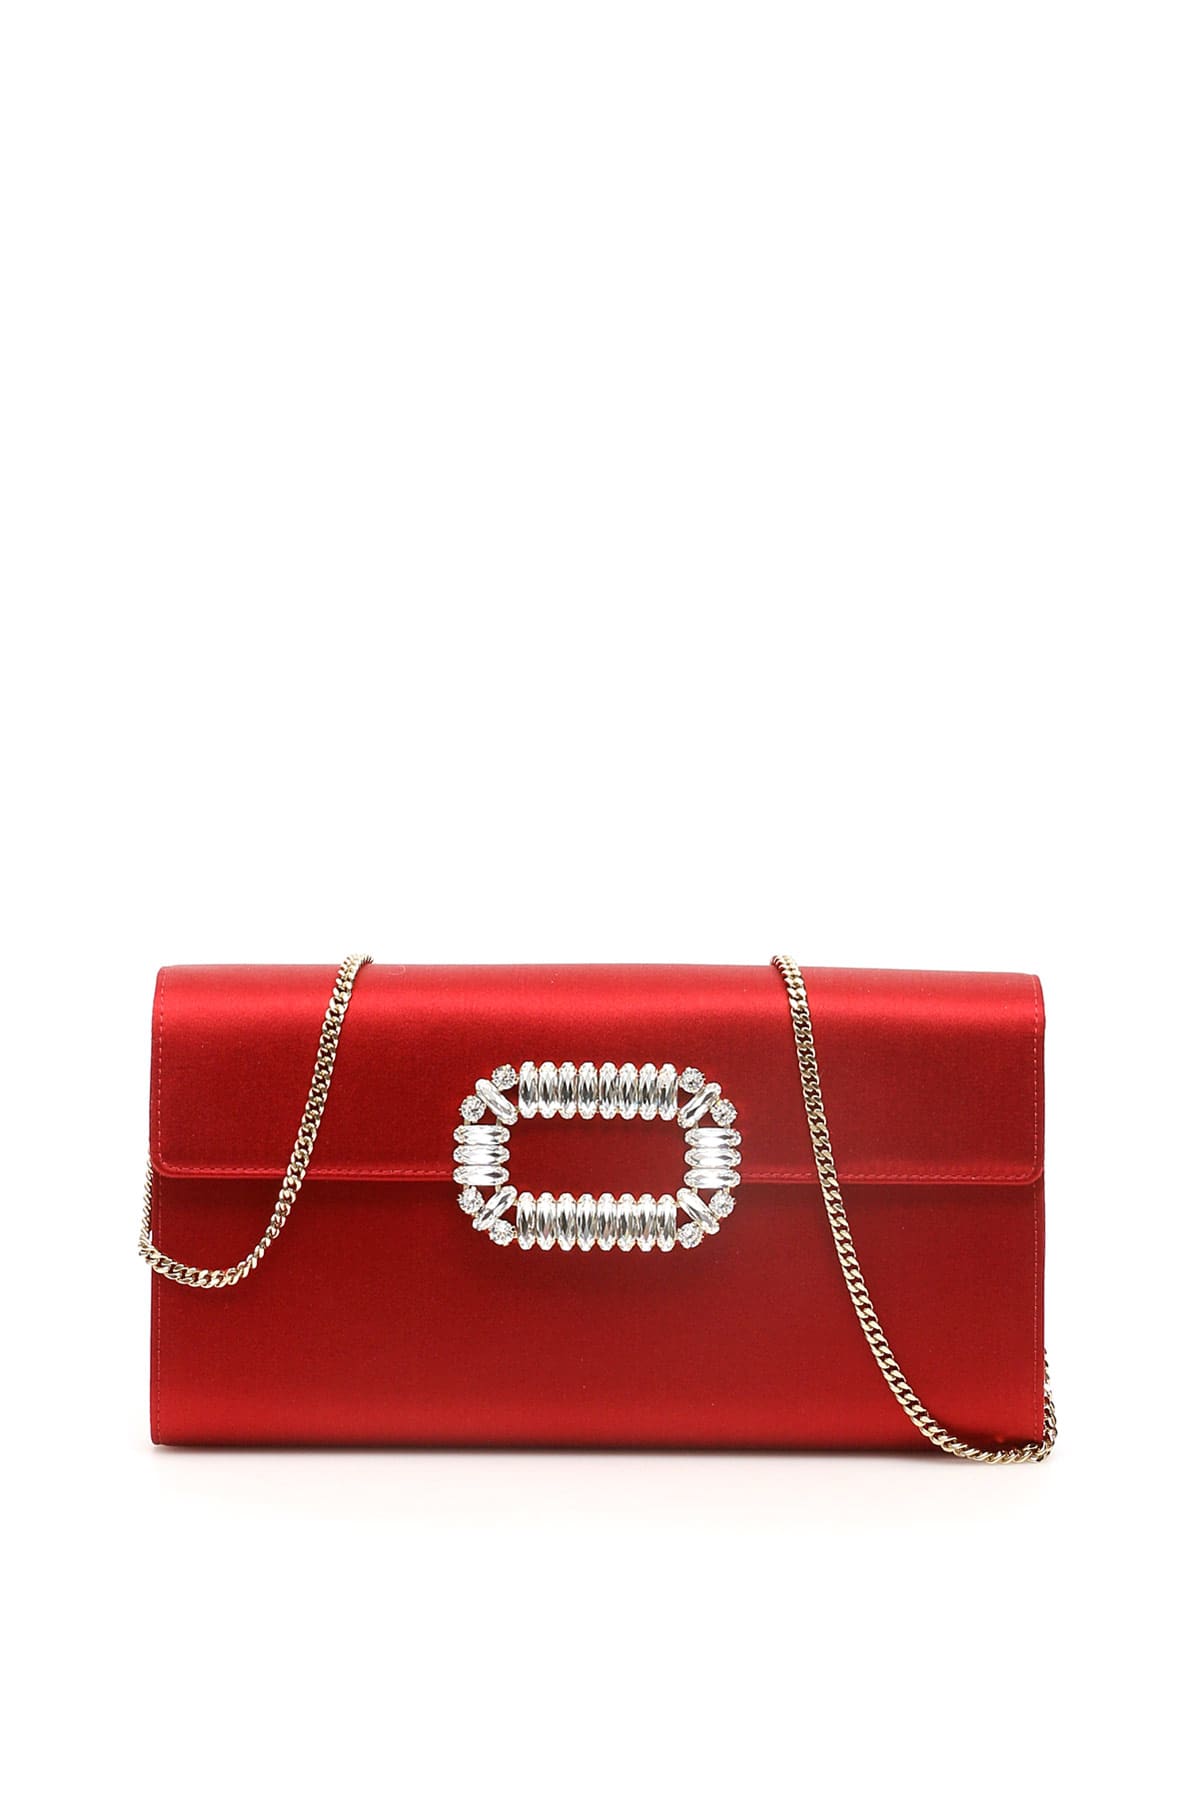 Roger Vivier Envelope Flap Sexy Choc Clutch In Ciliegia (red)